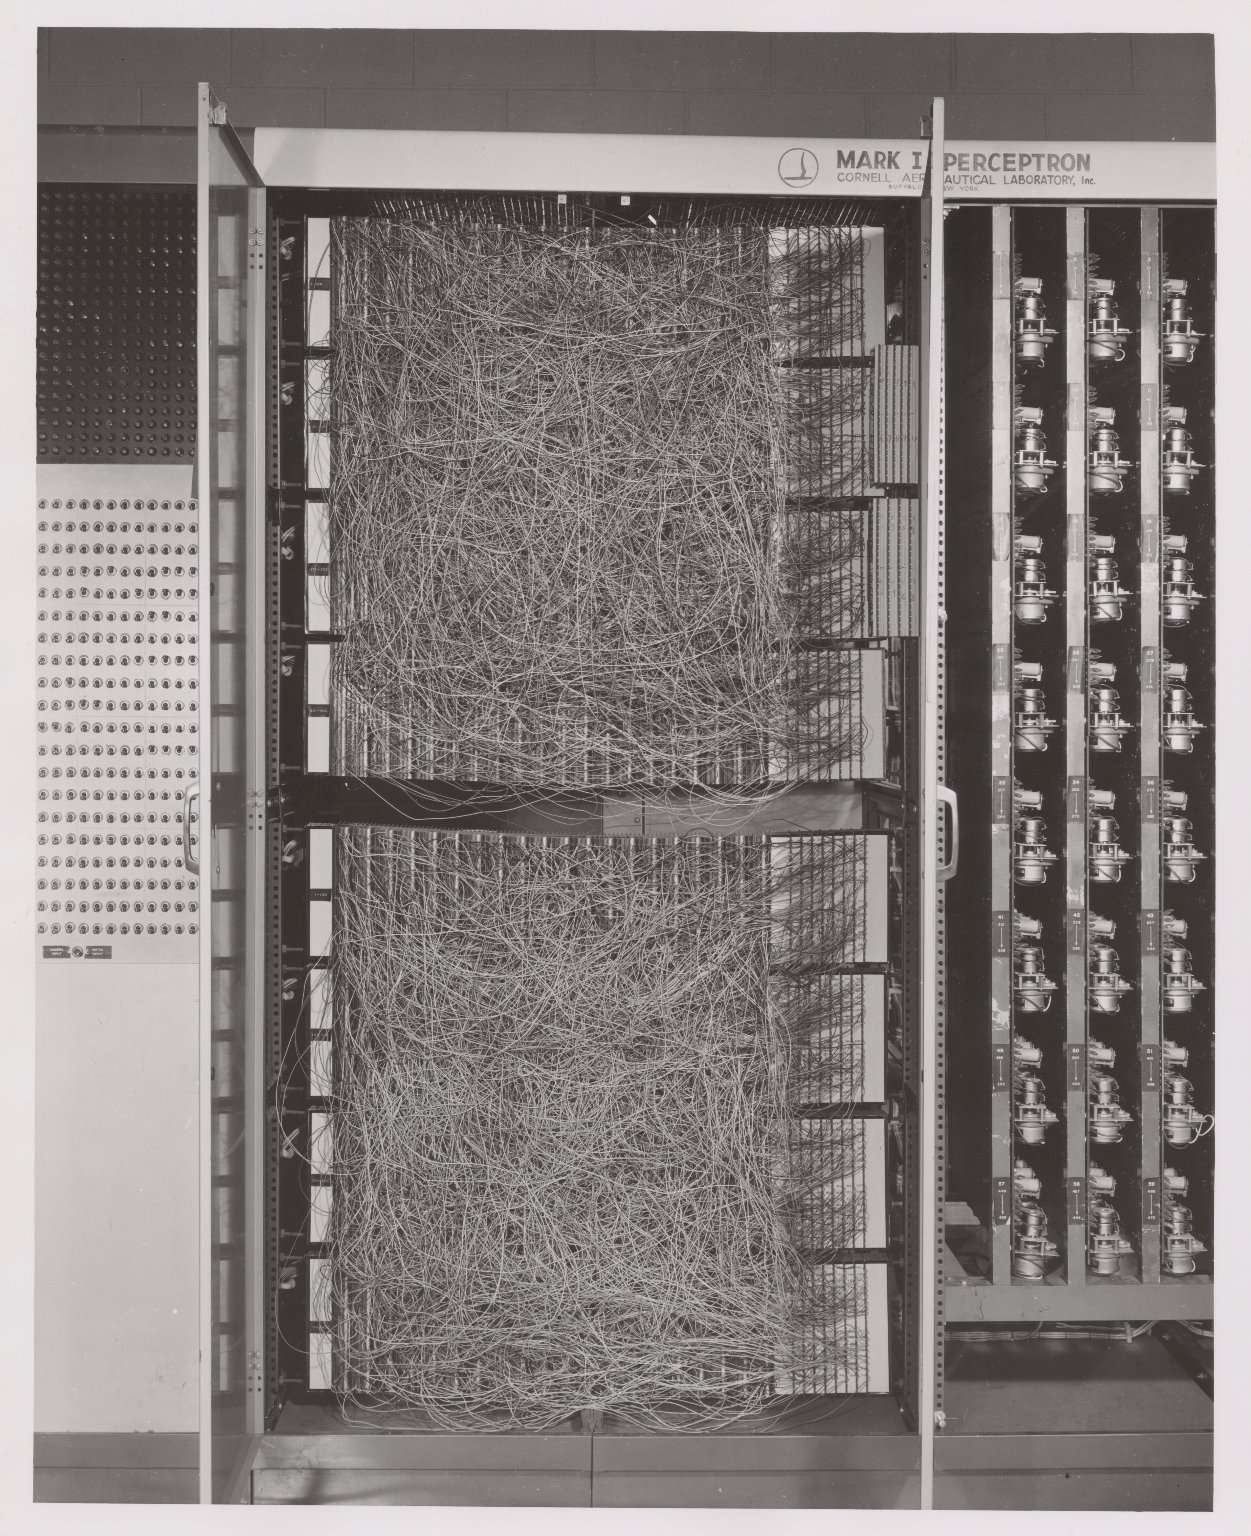 The Mark I Perceptron, the progenitor of modern neural networks. Image courtesy of Cornell University News Service records, #4-3-15. Division of Rare and Manuscript Collections, Cornell University Library.